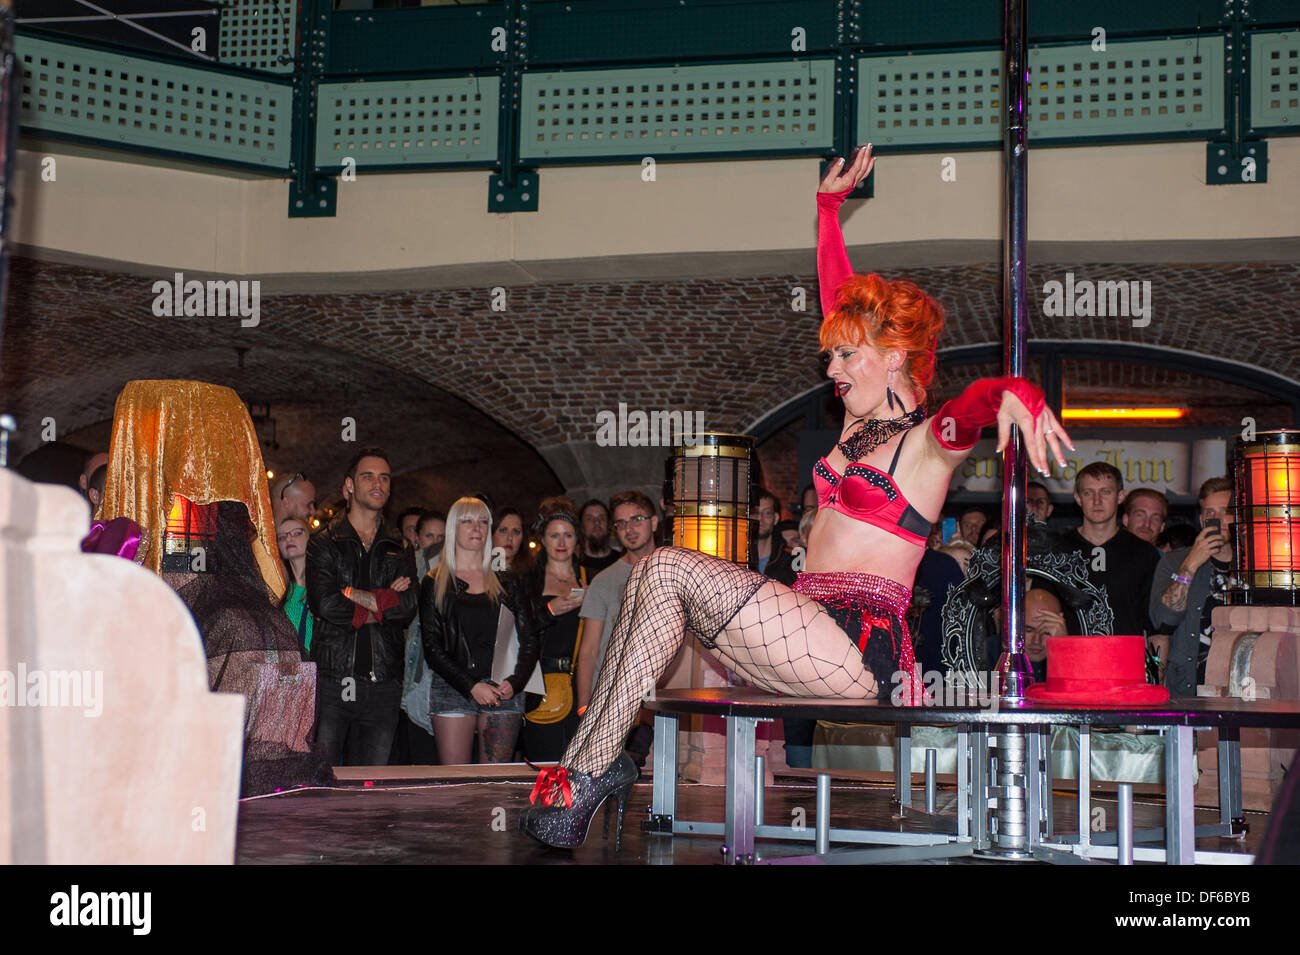 Burlesque artist Amber Rosia performing at the pin-up stage at the London Tattoo Convention.  The event attracts over 300 of the most sought after tattoo artists from around the world as well as alternative performers and burlesque acts Stock Photo